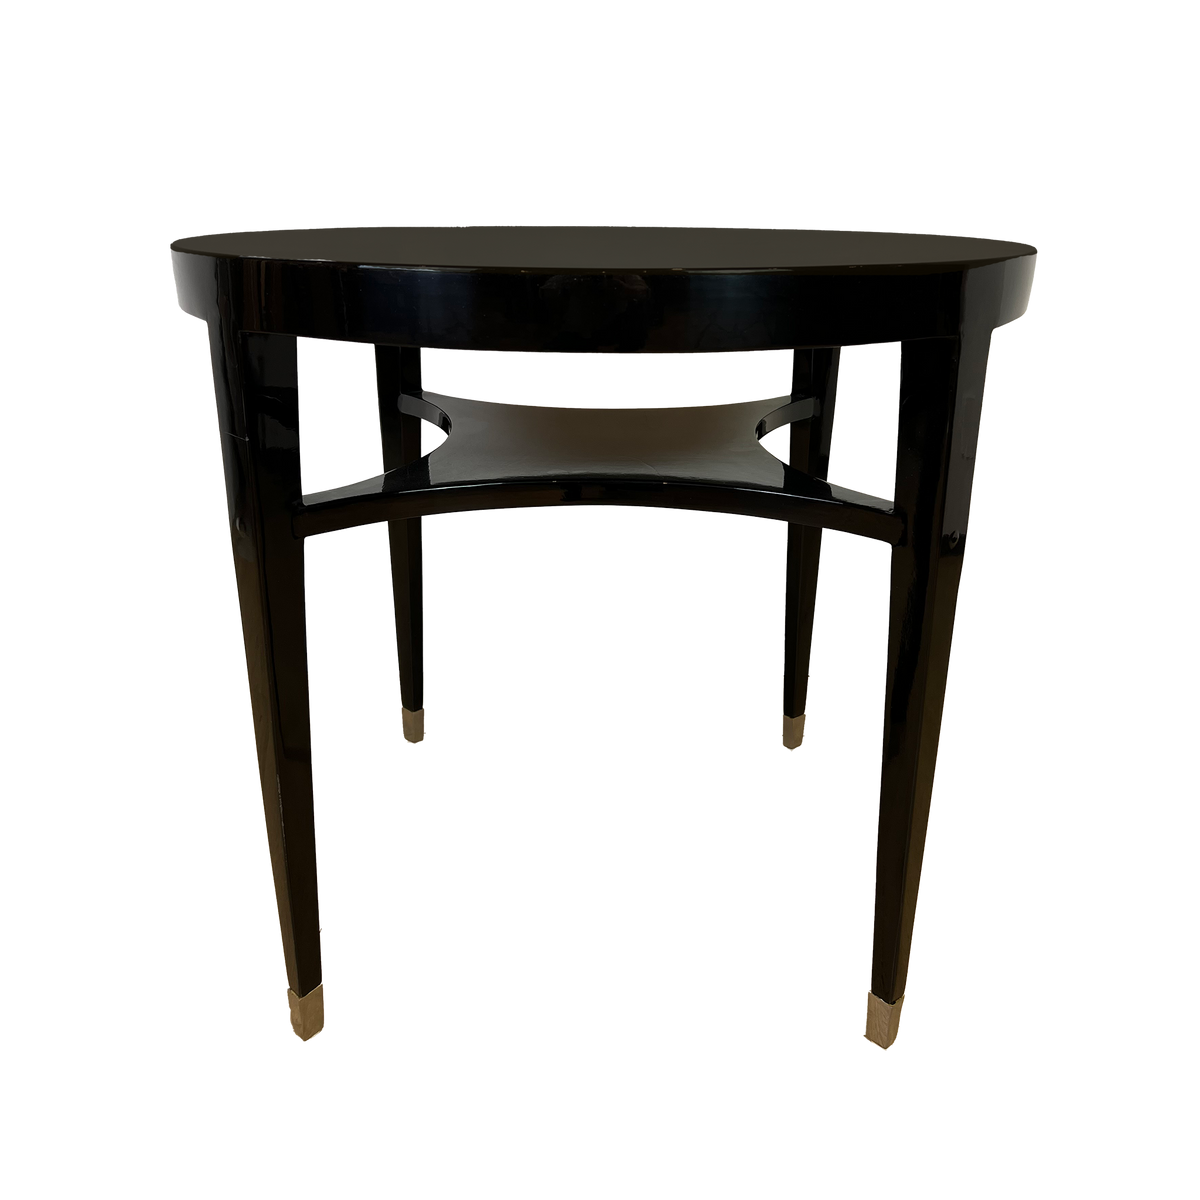 Circular Black Lacquer Side Table